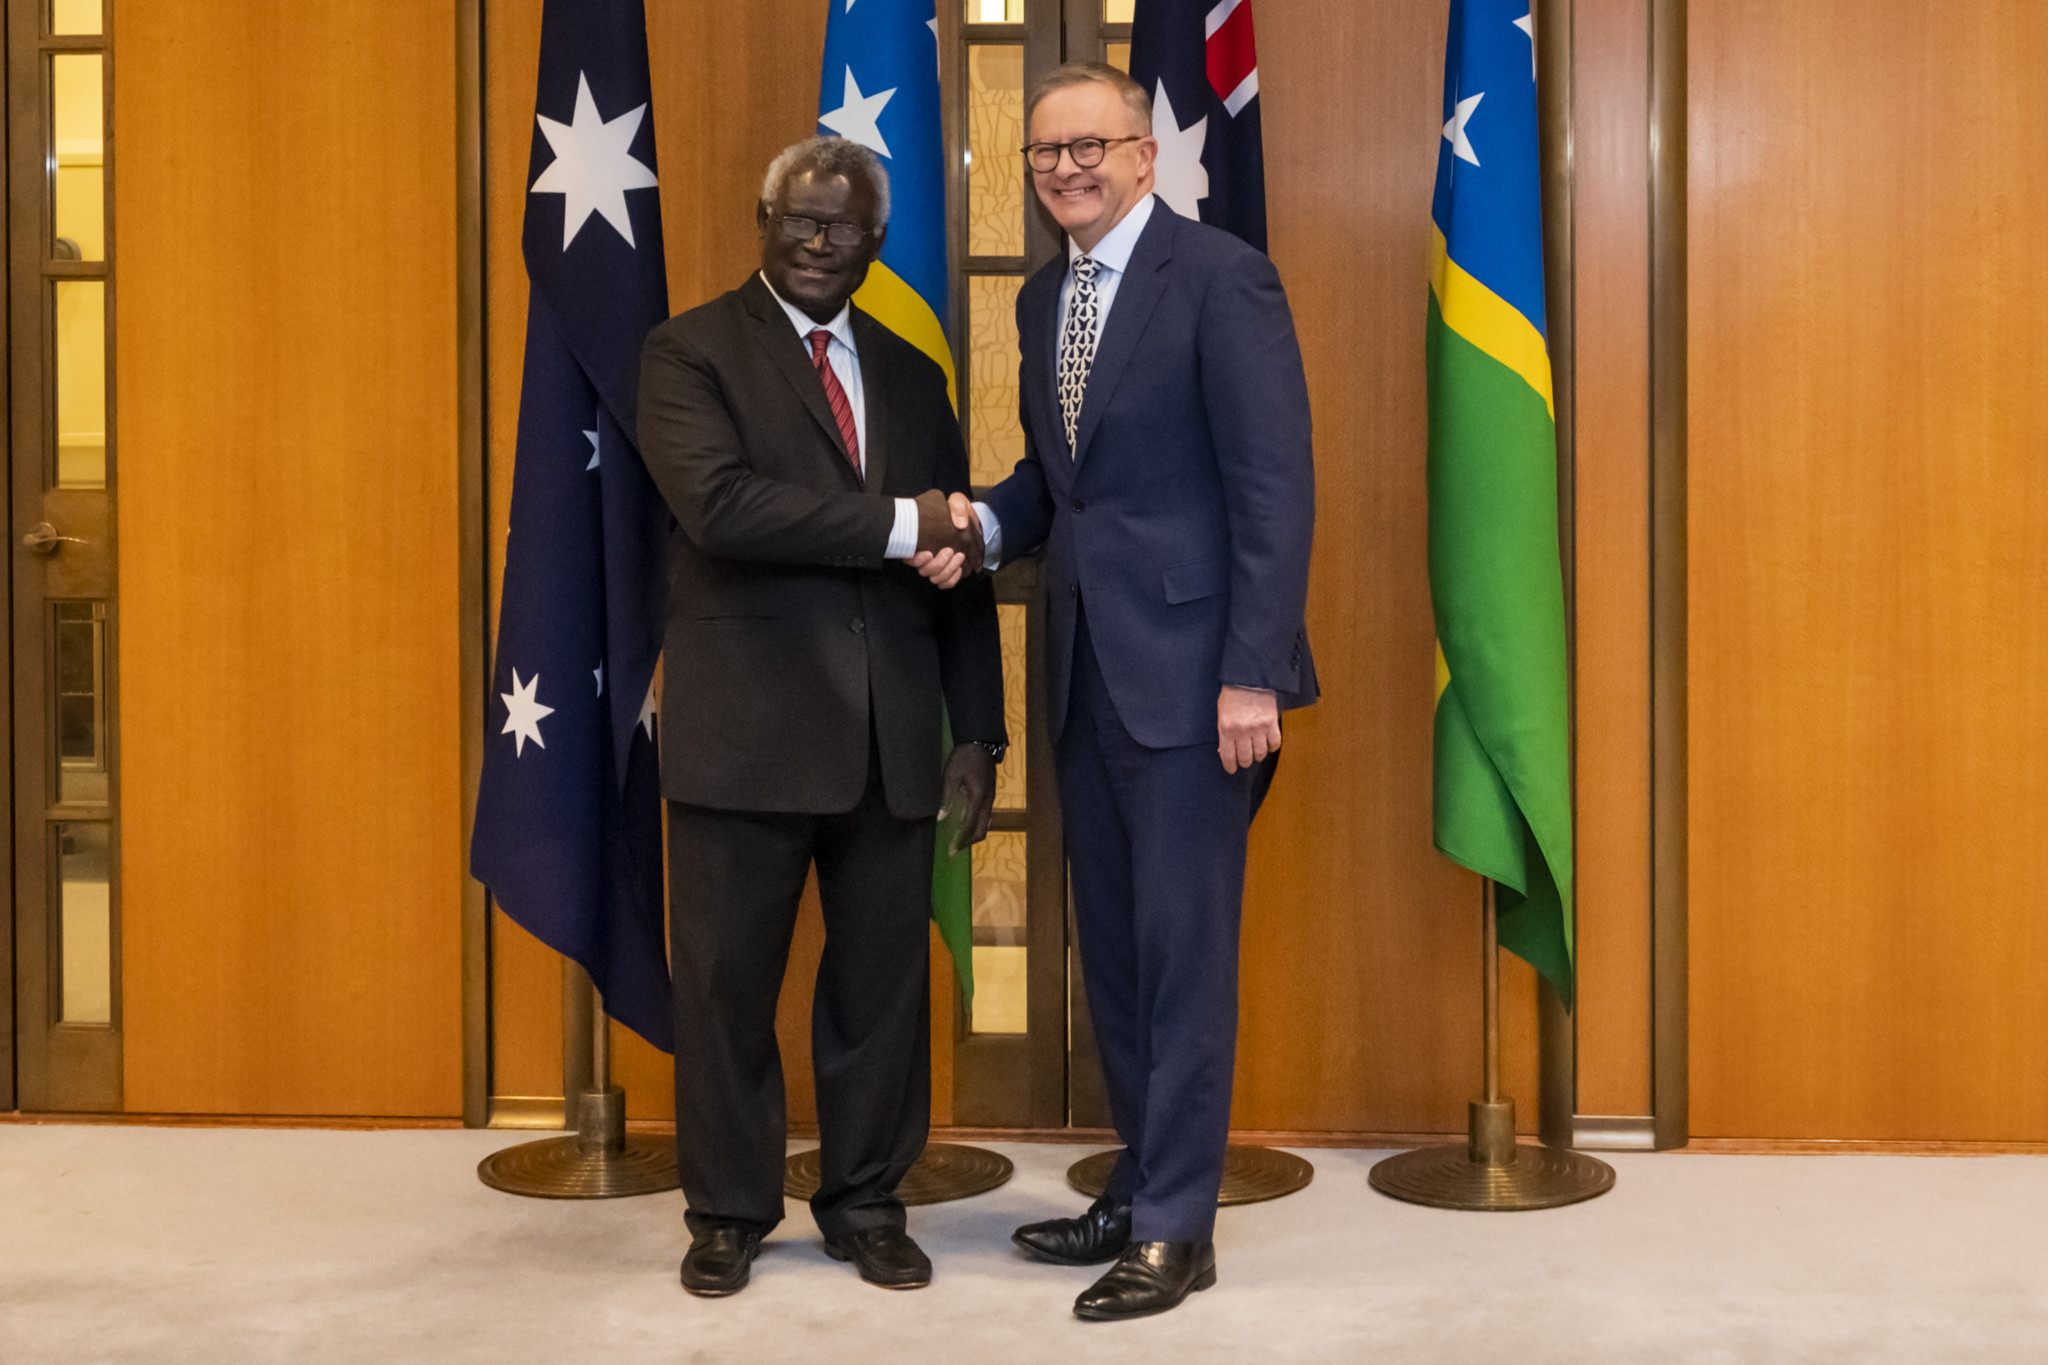 Manasseh Sogavare, left, and Anthony Albanese met with relations between the Solomon Islands and Australia strained ©Getty Images